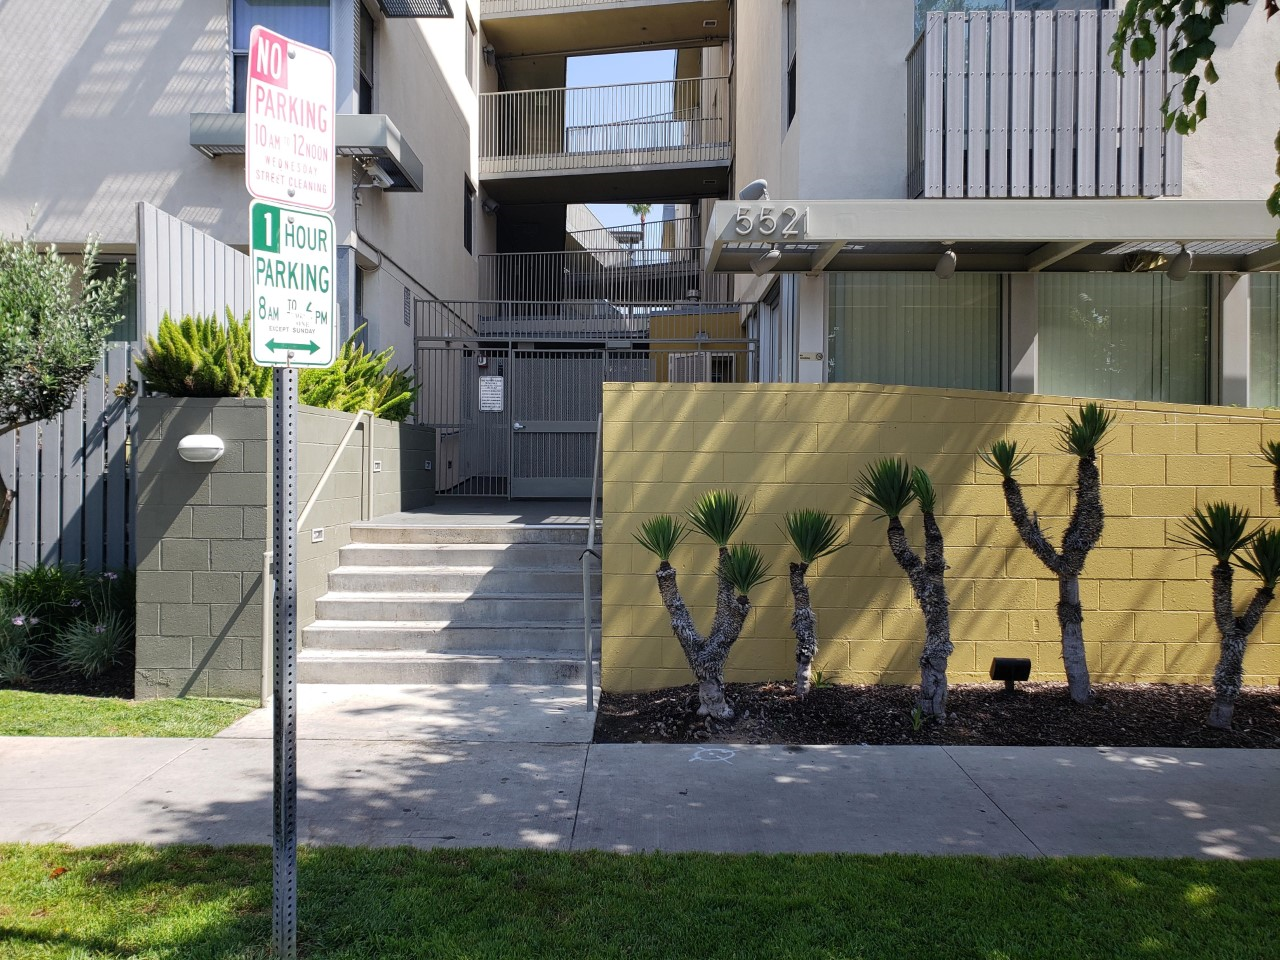 Image of front entrance to Harold Way Apartments. Steps with hand rail leading up to gate entrance of building. On either side of side walk area plant beds and grass. Street parking notification sign near street that states no parking from 10am to 12pm on